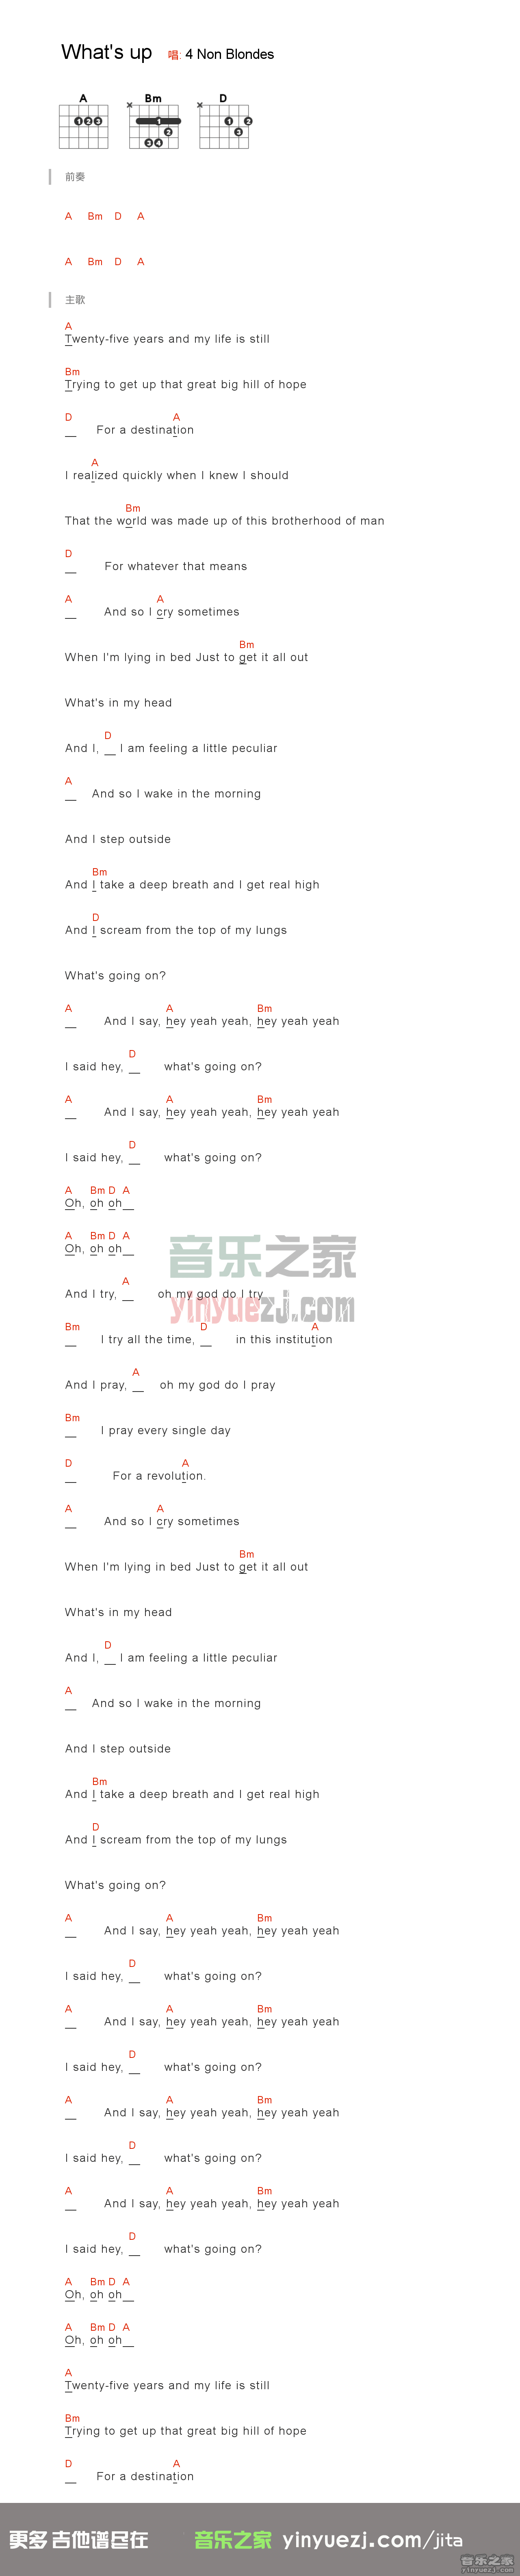 what’s up吉他谱 A调和弦谱-4NonBlondes插图